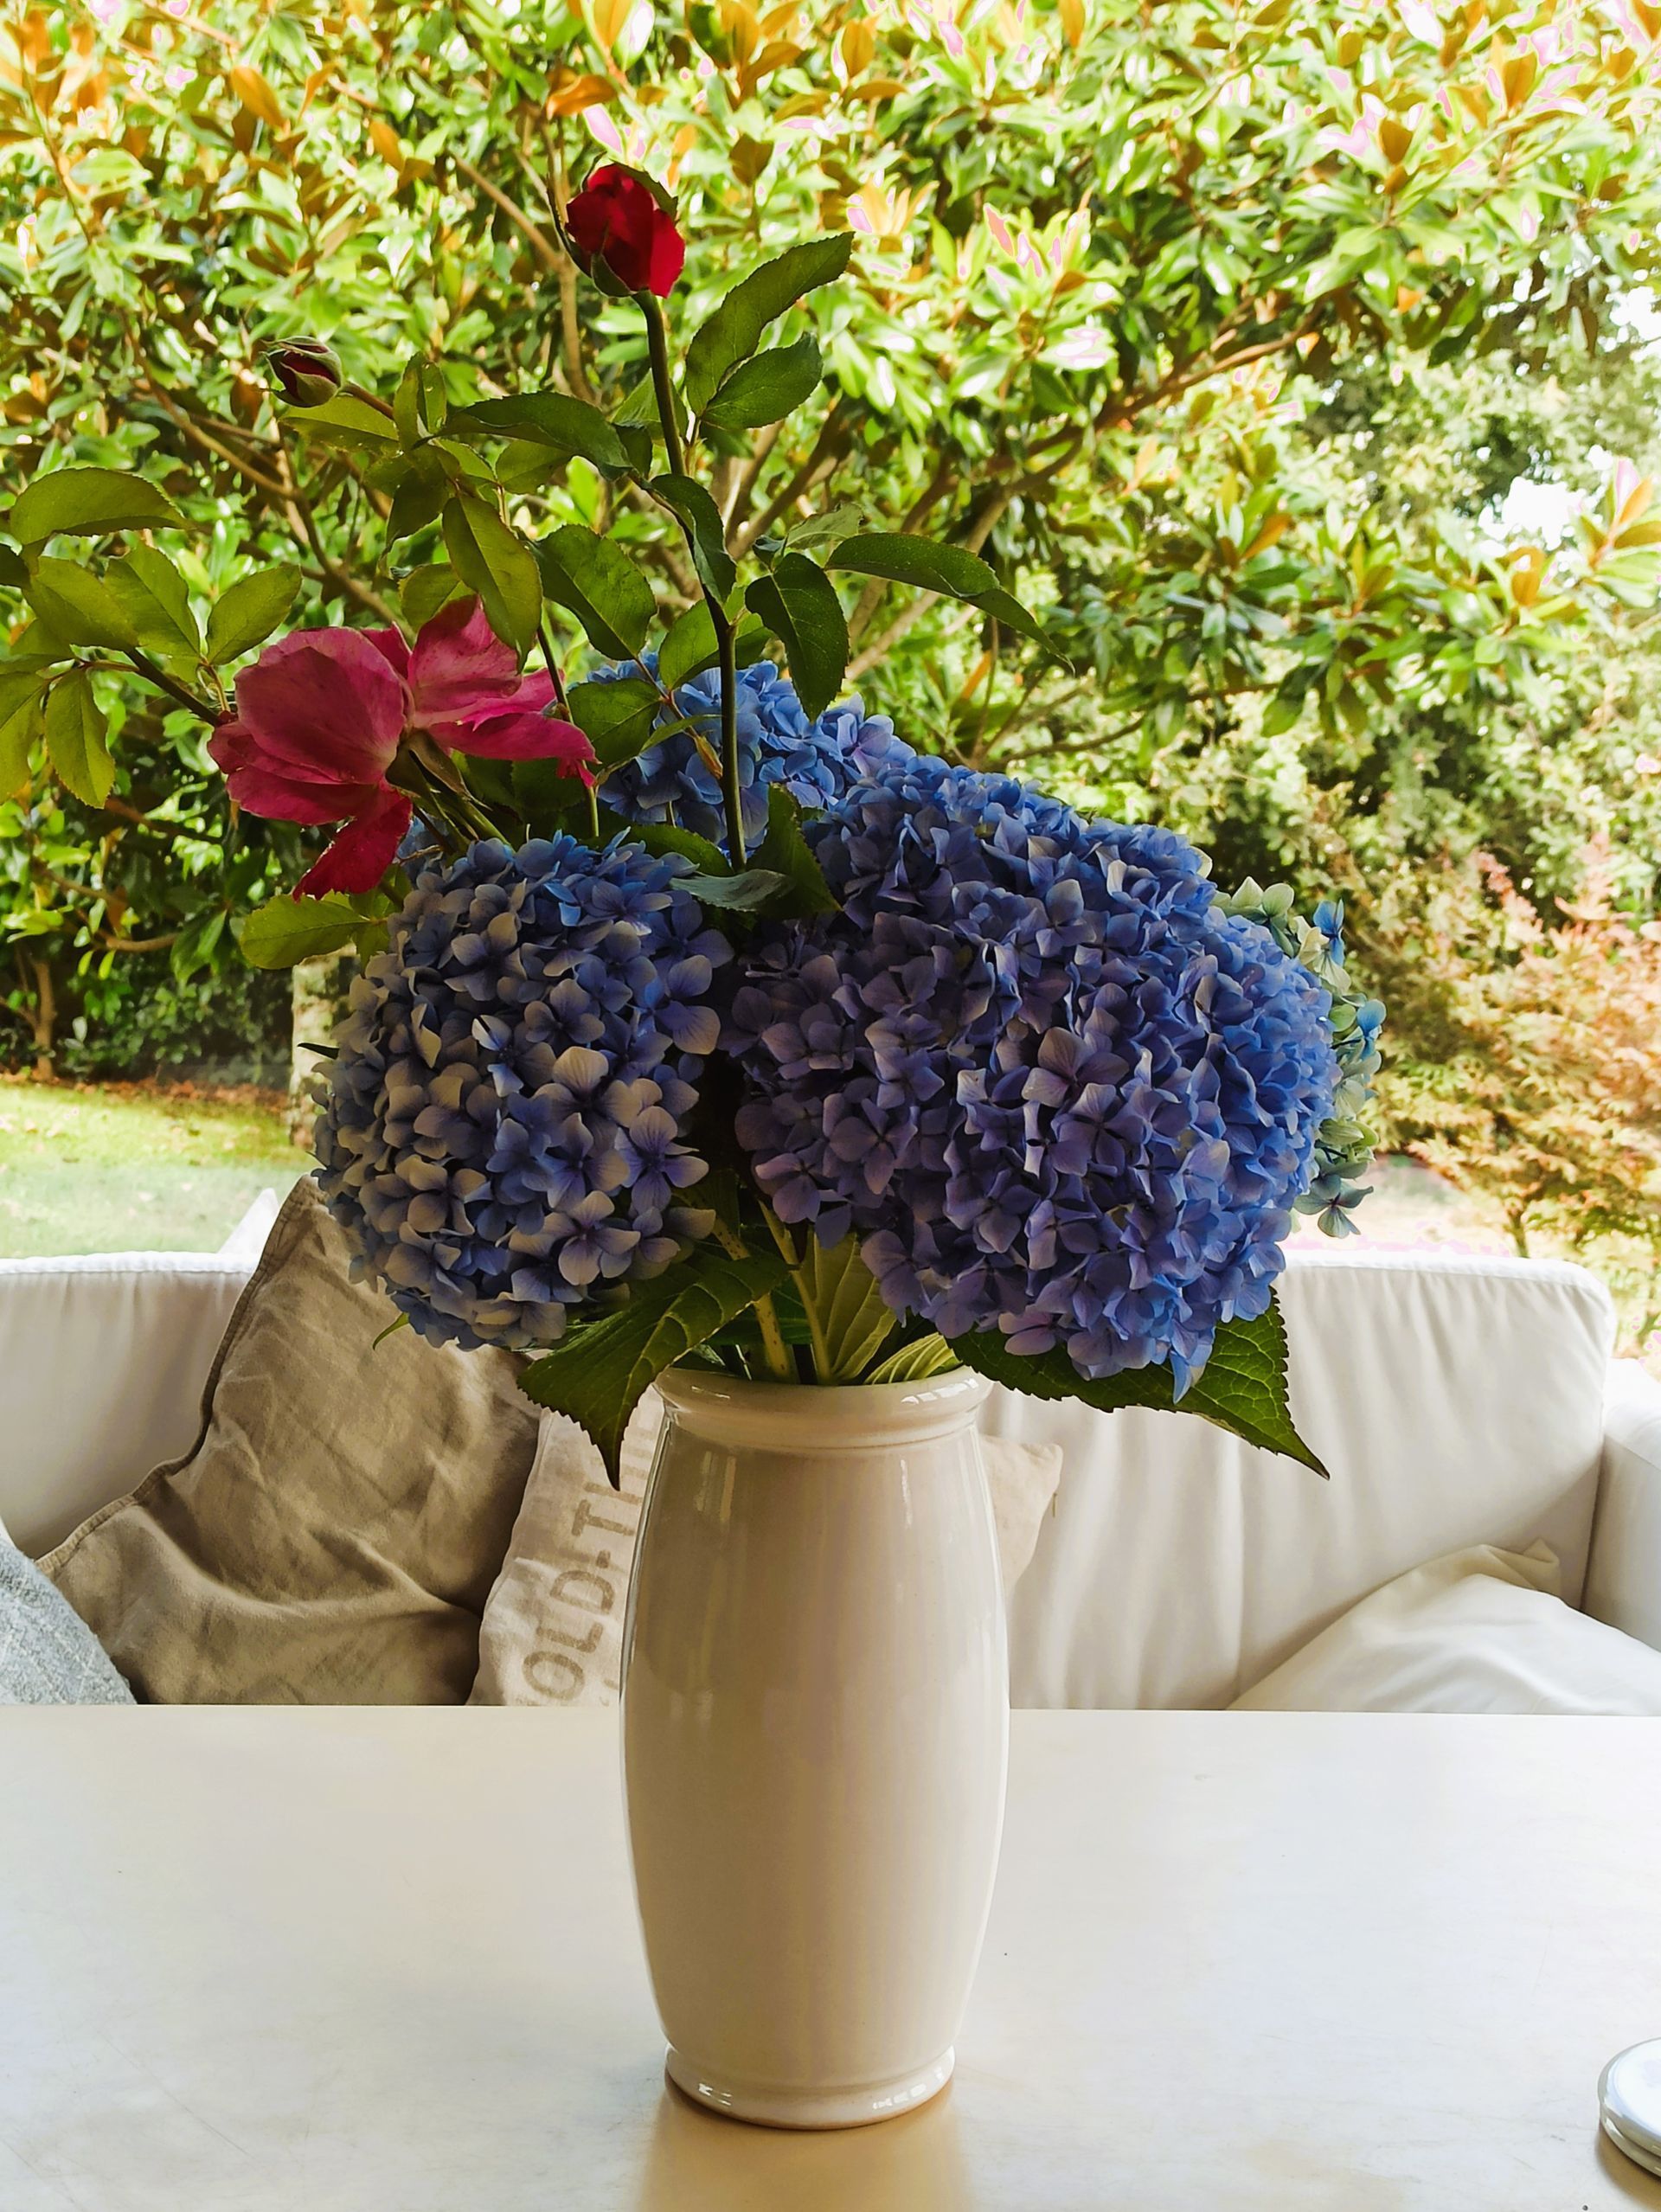 The hydrangea is a plant that requires little care and proper pruning will reward you with its exube